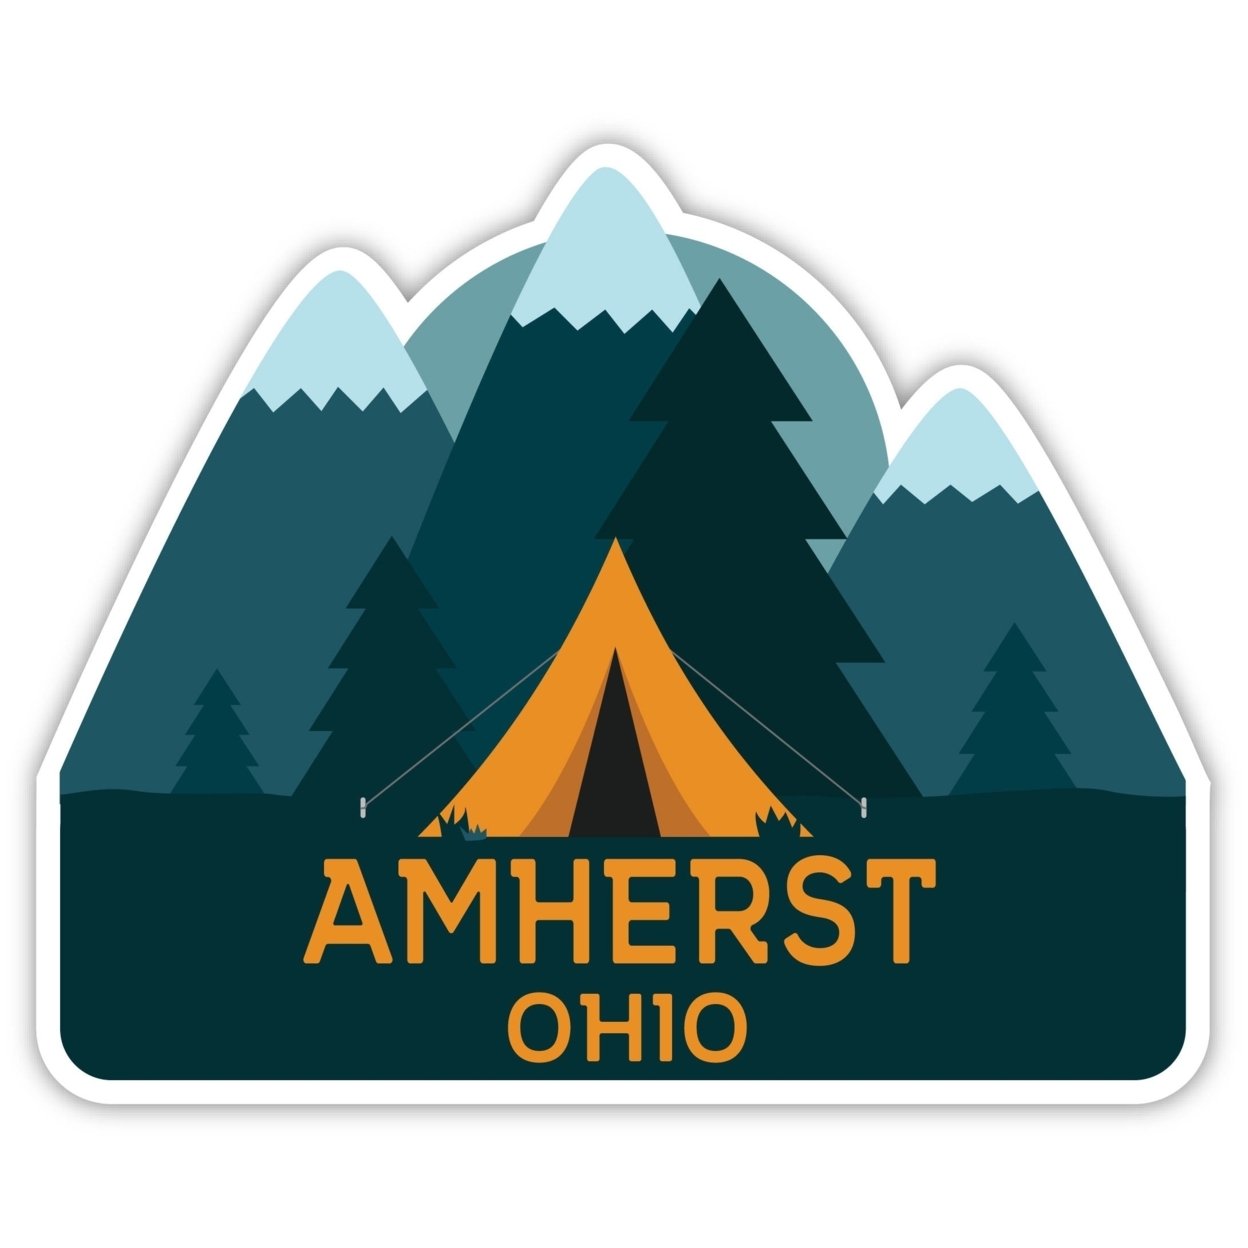 Amherst Ohio Souvenir Decorative Stickers (Choose Theme And Size) - 4-Pack, 6-Inch, Tent